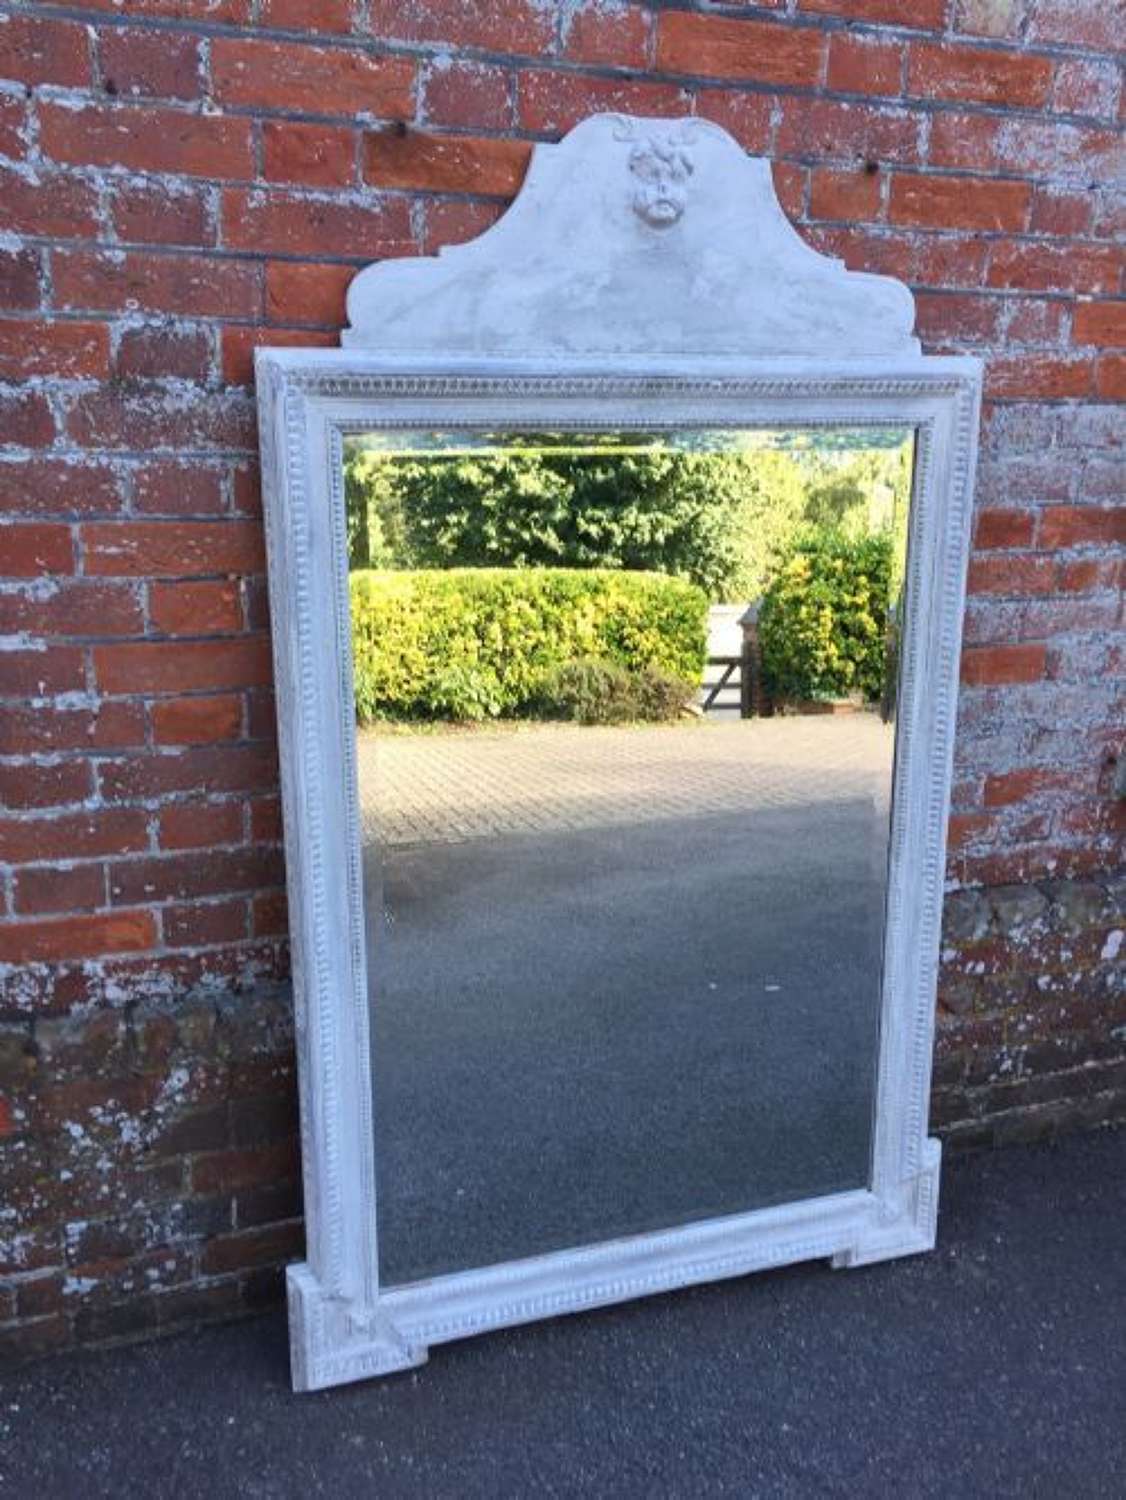 A Stunning Large Highly Decorative Antique 19th C Italian Mirror